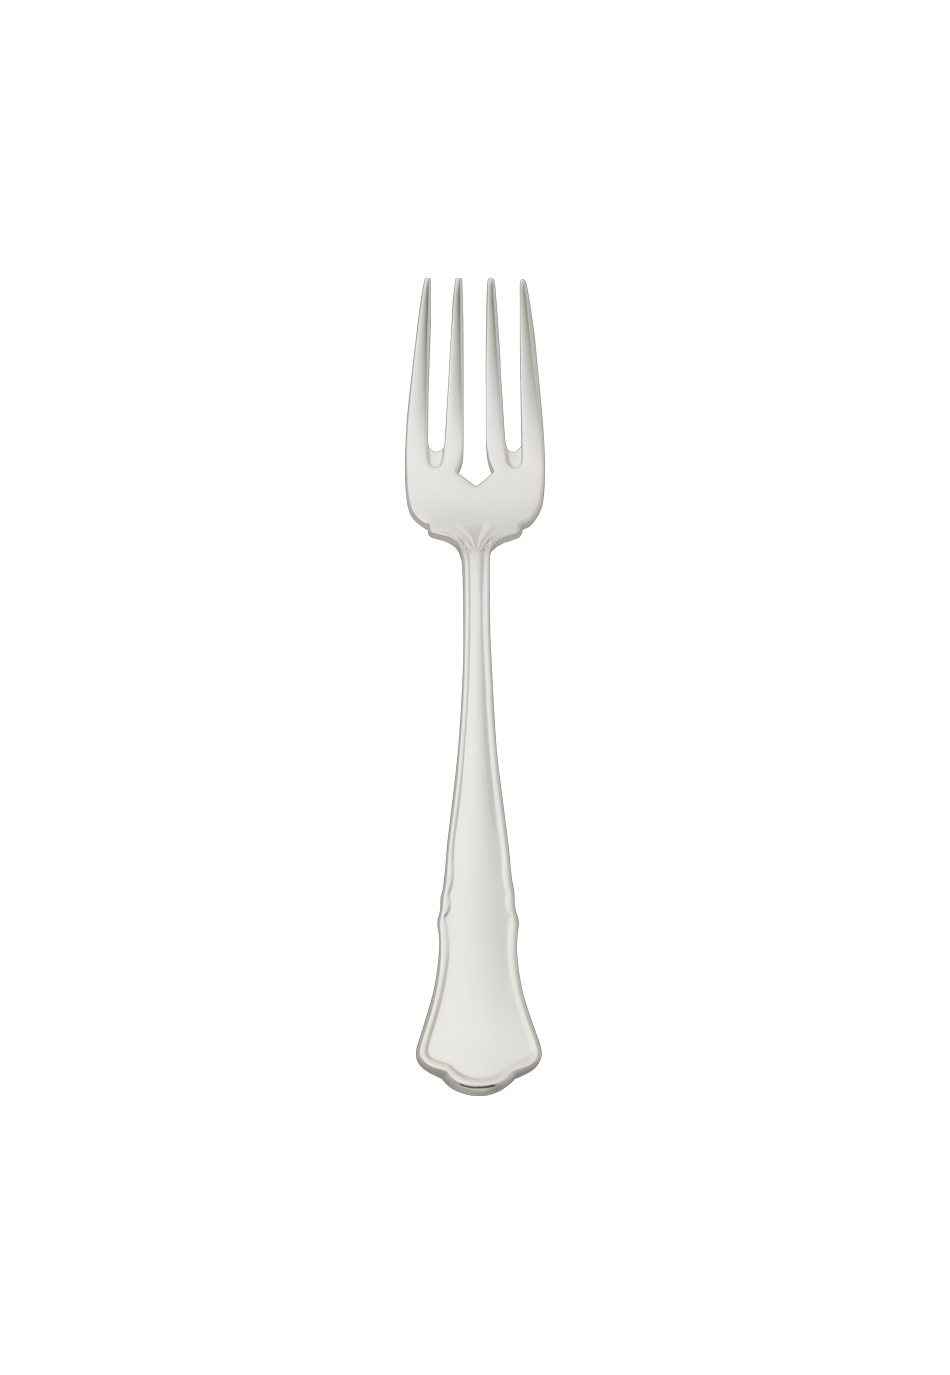 Alt-Chippendale Fish Fork (150g massive silverplated)